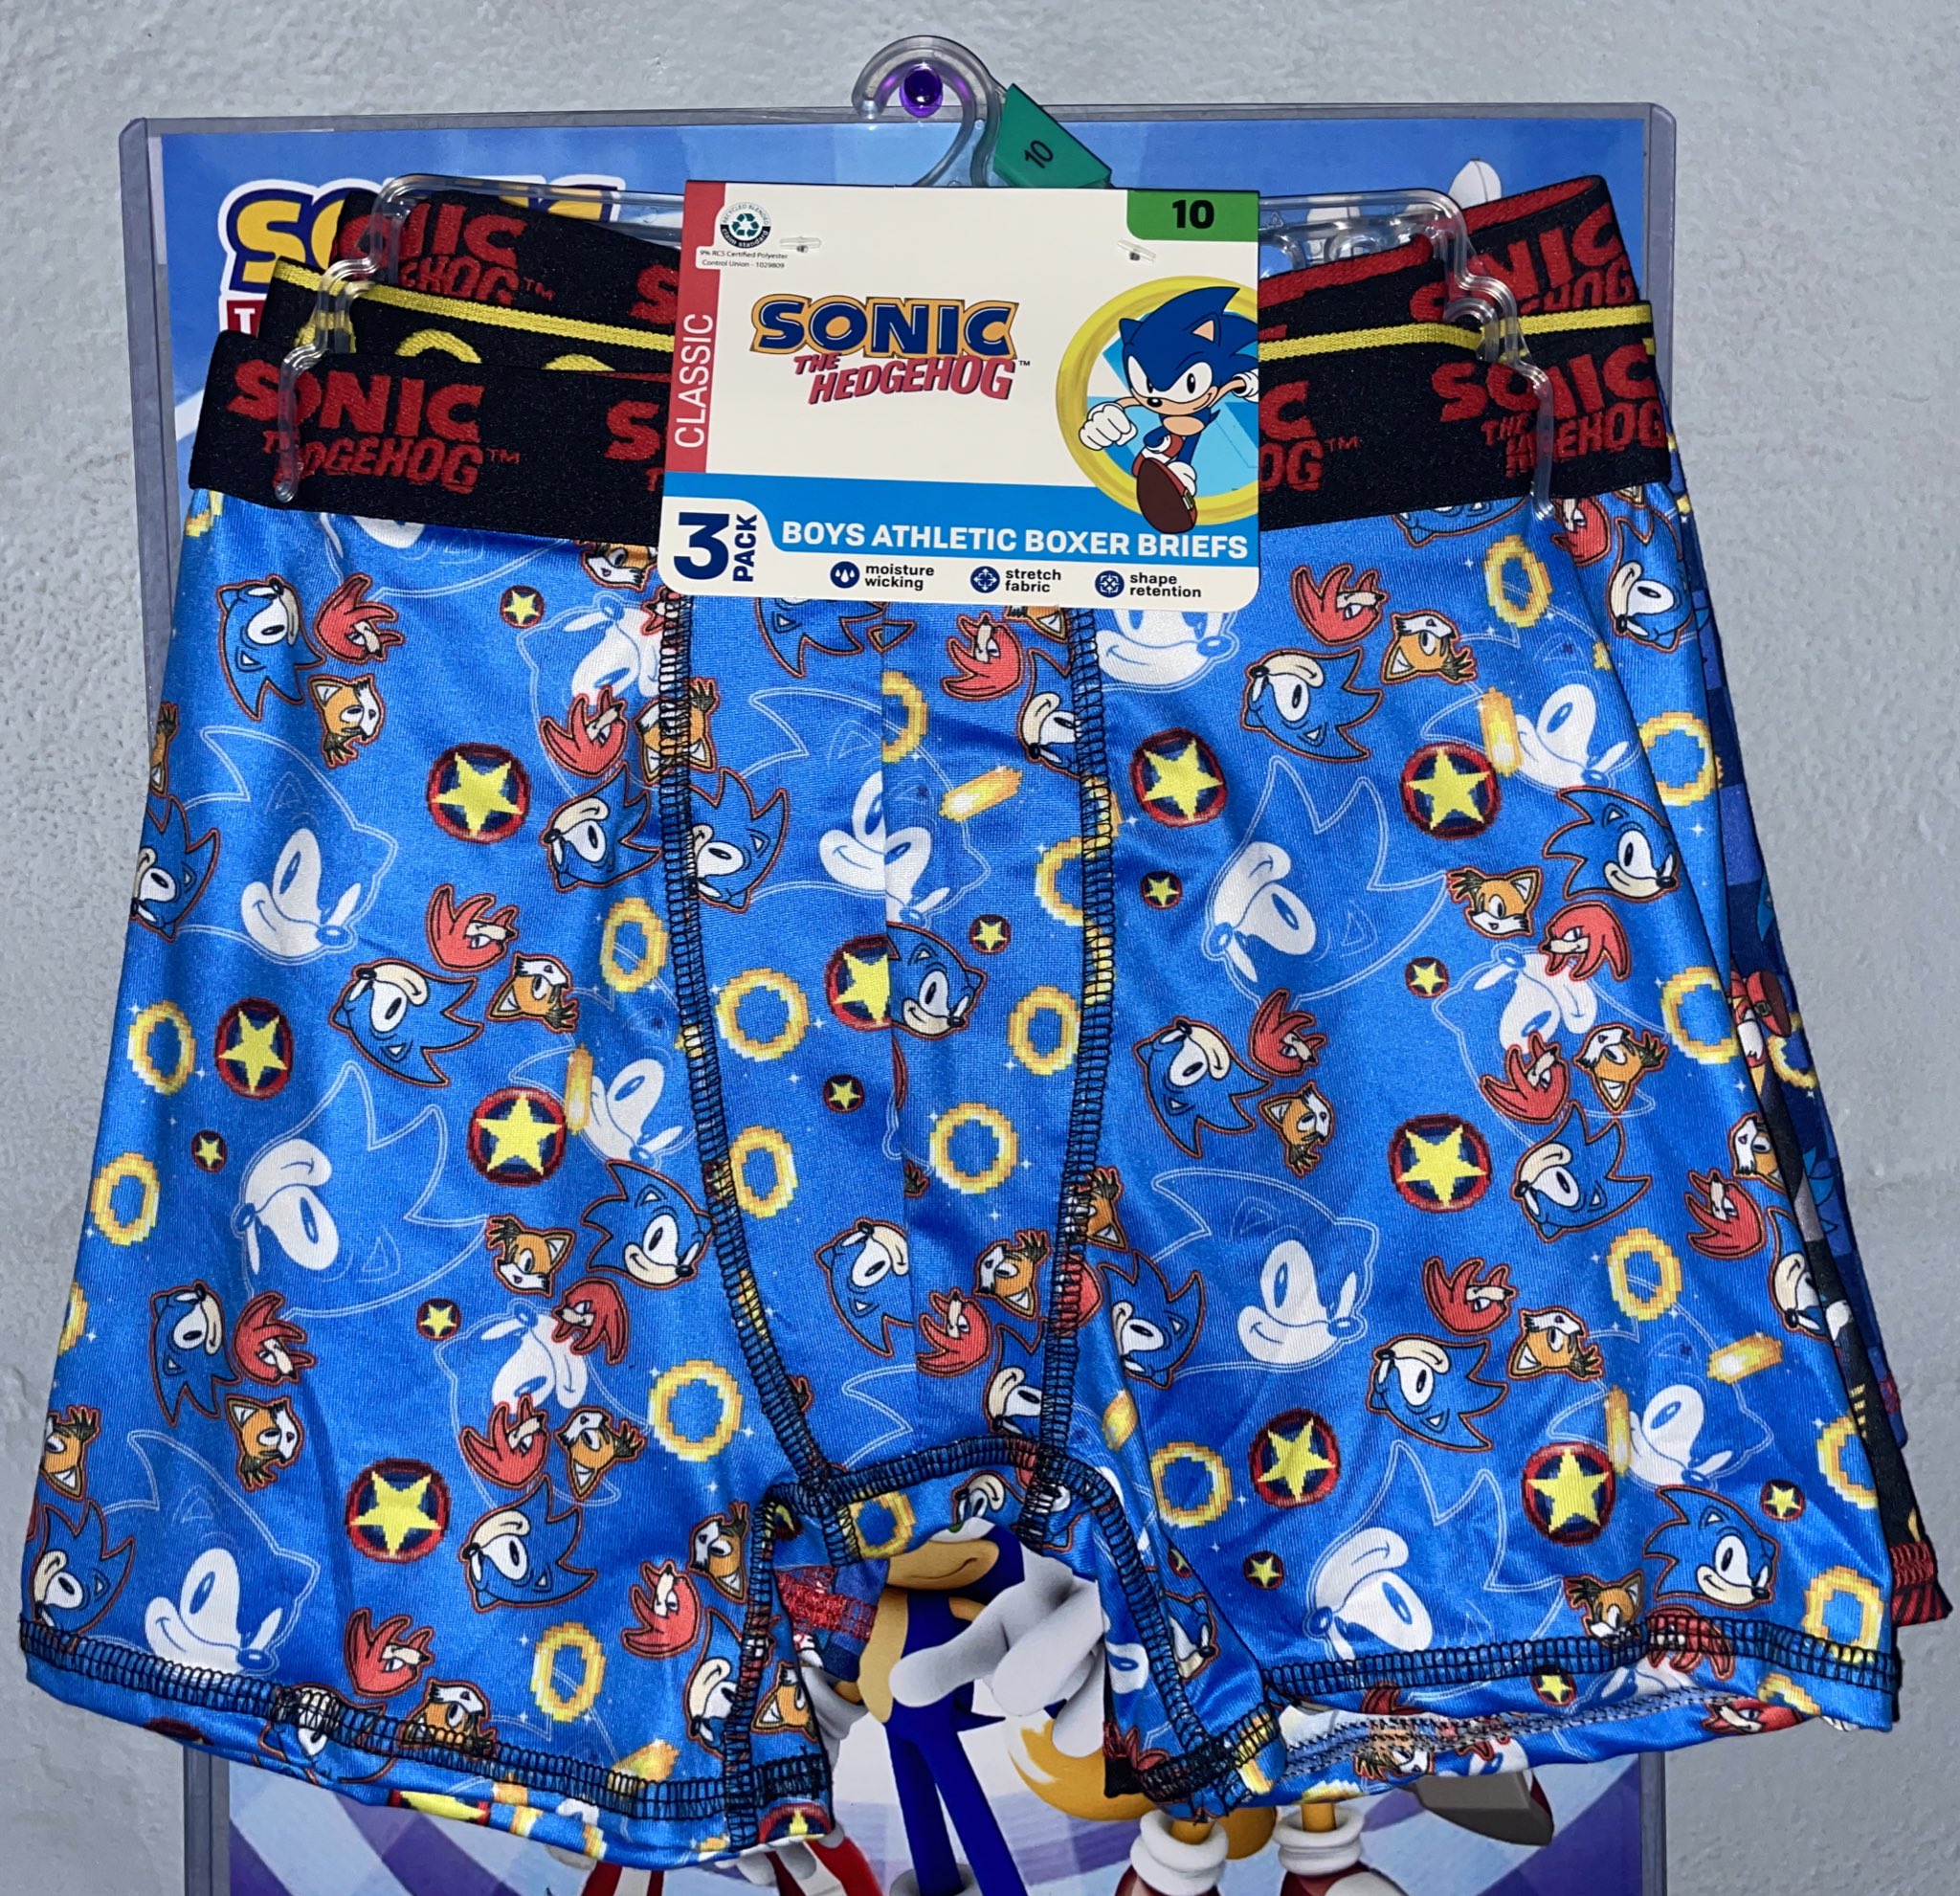 SonicStyleBlog on X: Available now is a new 3 pack of Sonic the